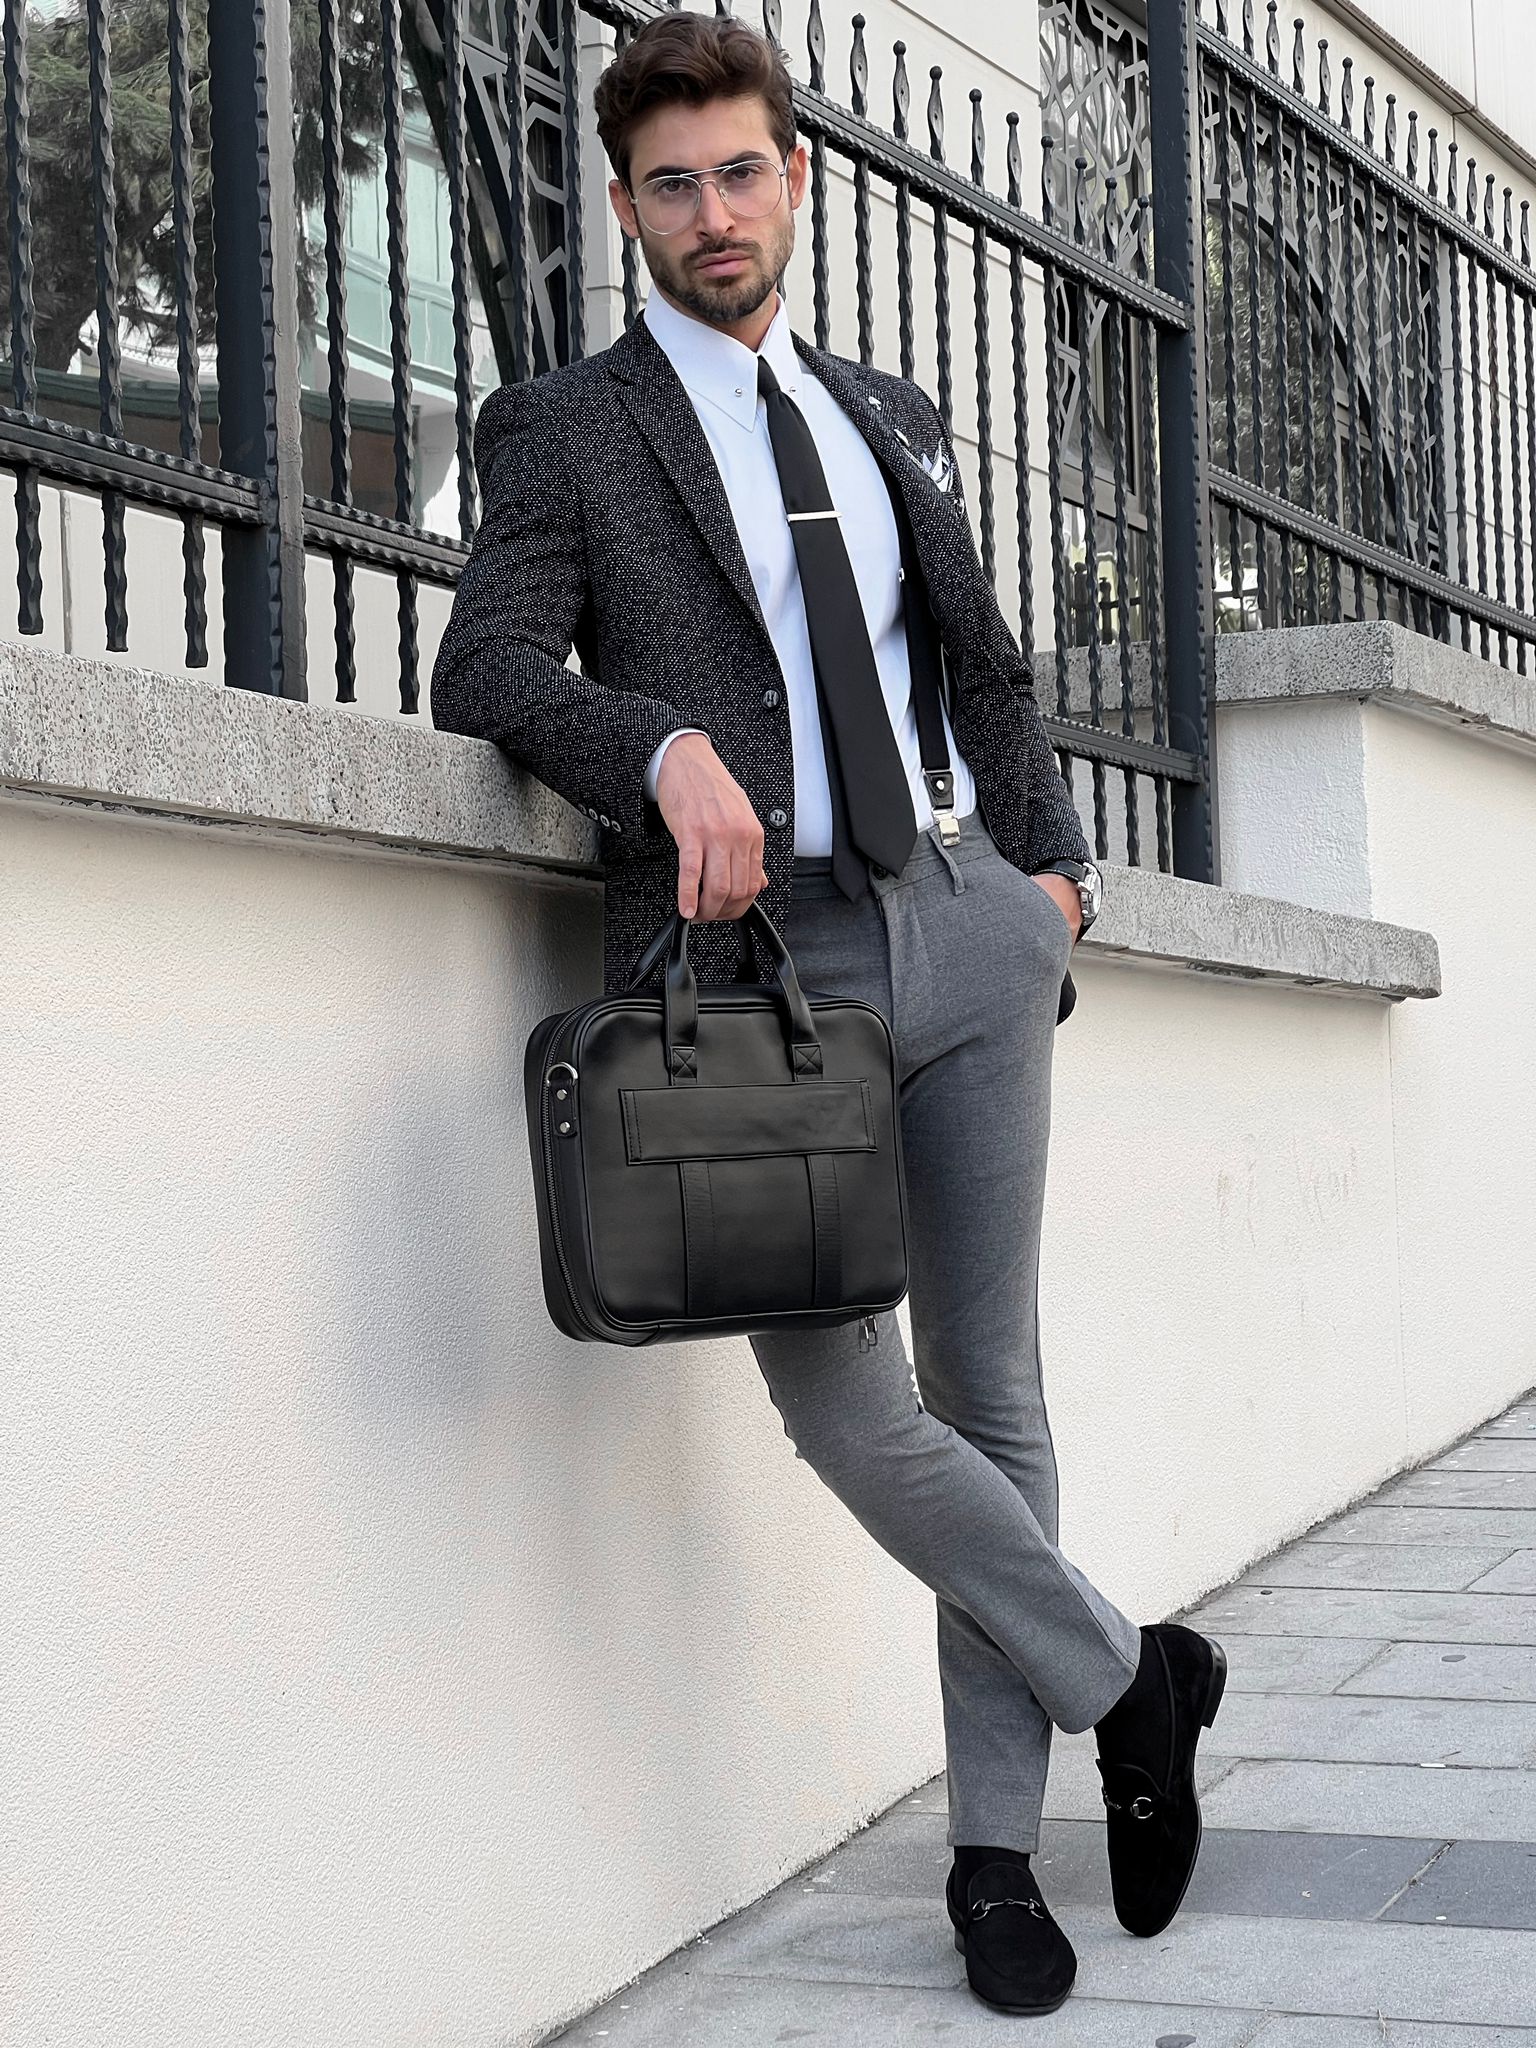 Black Blazer with Light Blue Pants Outfits For Men (21 ideas & outfits) |  Lookastic